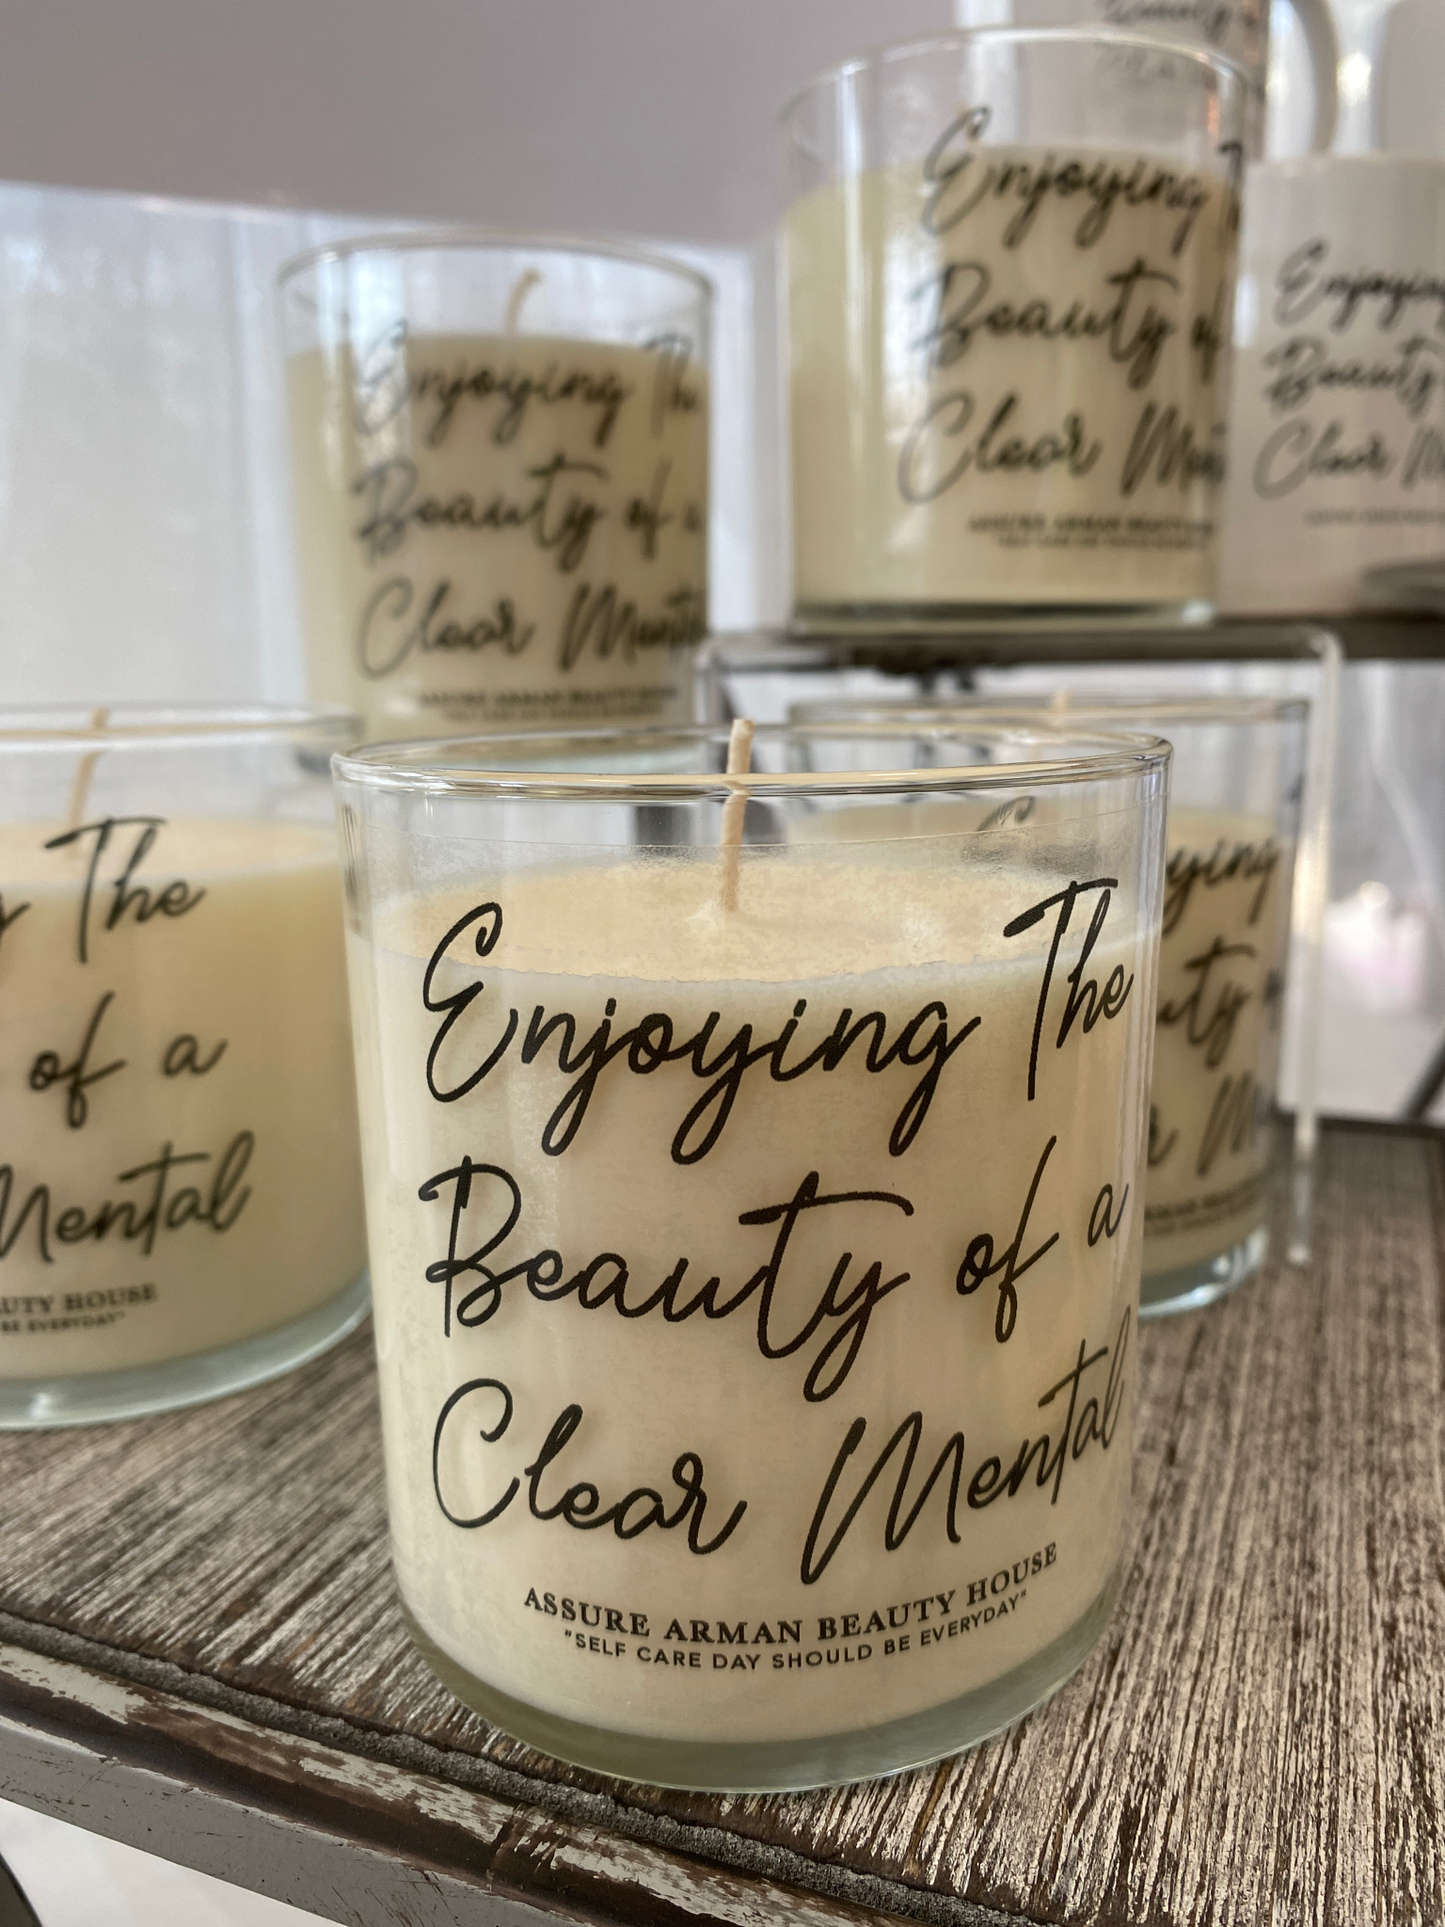 Clear Mental Candle